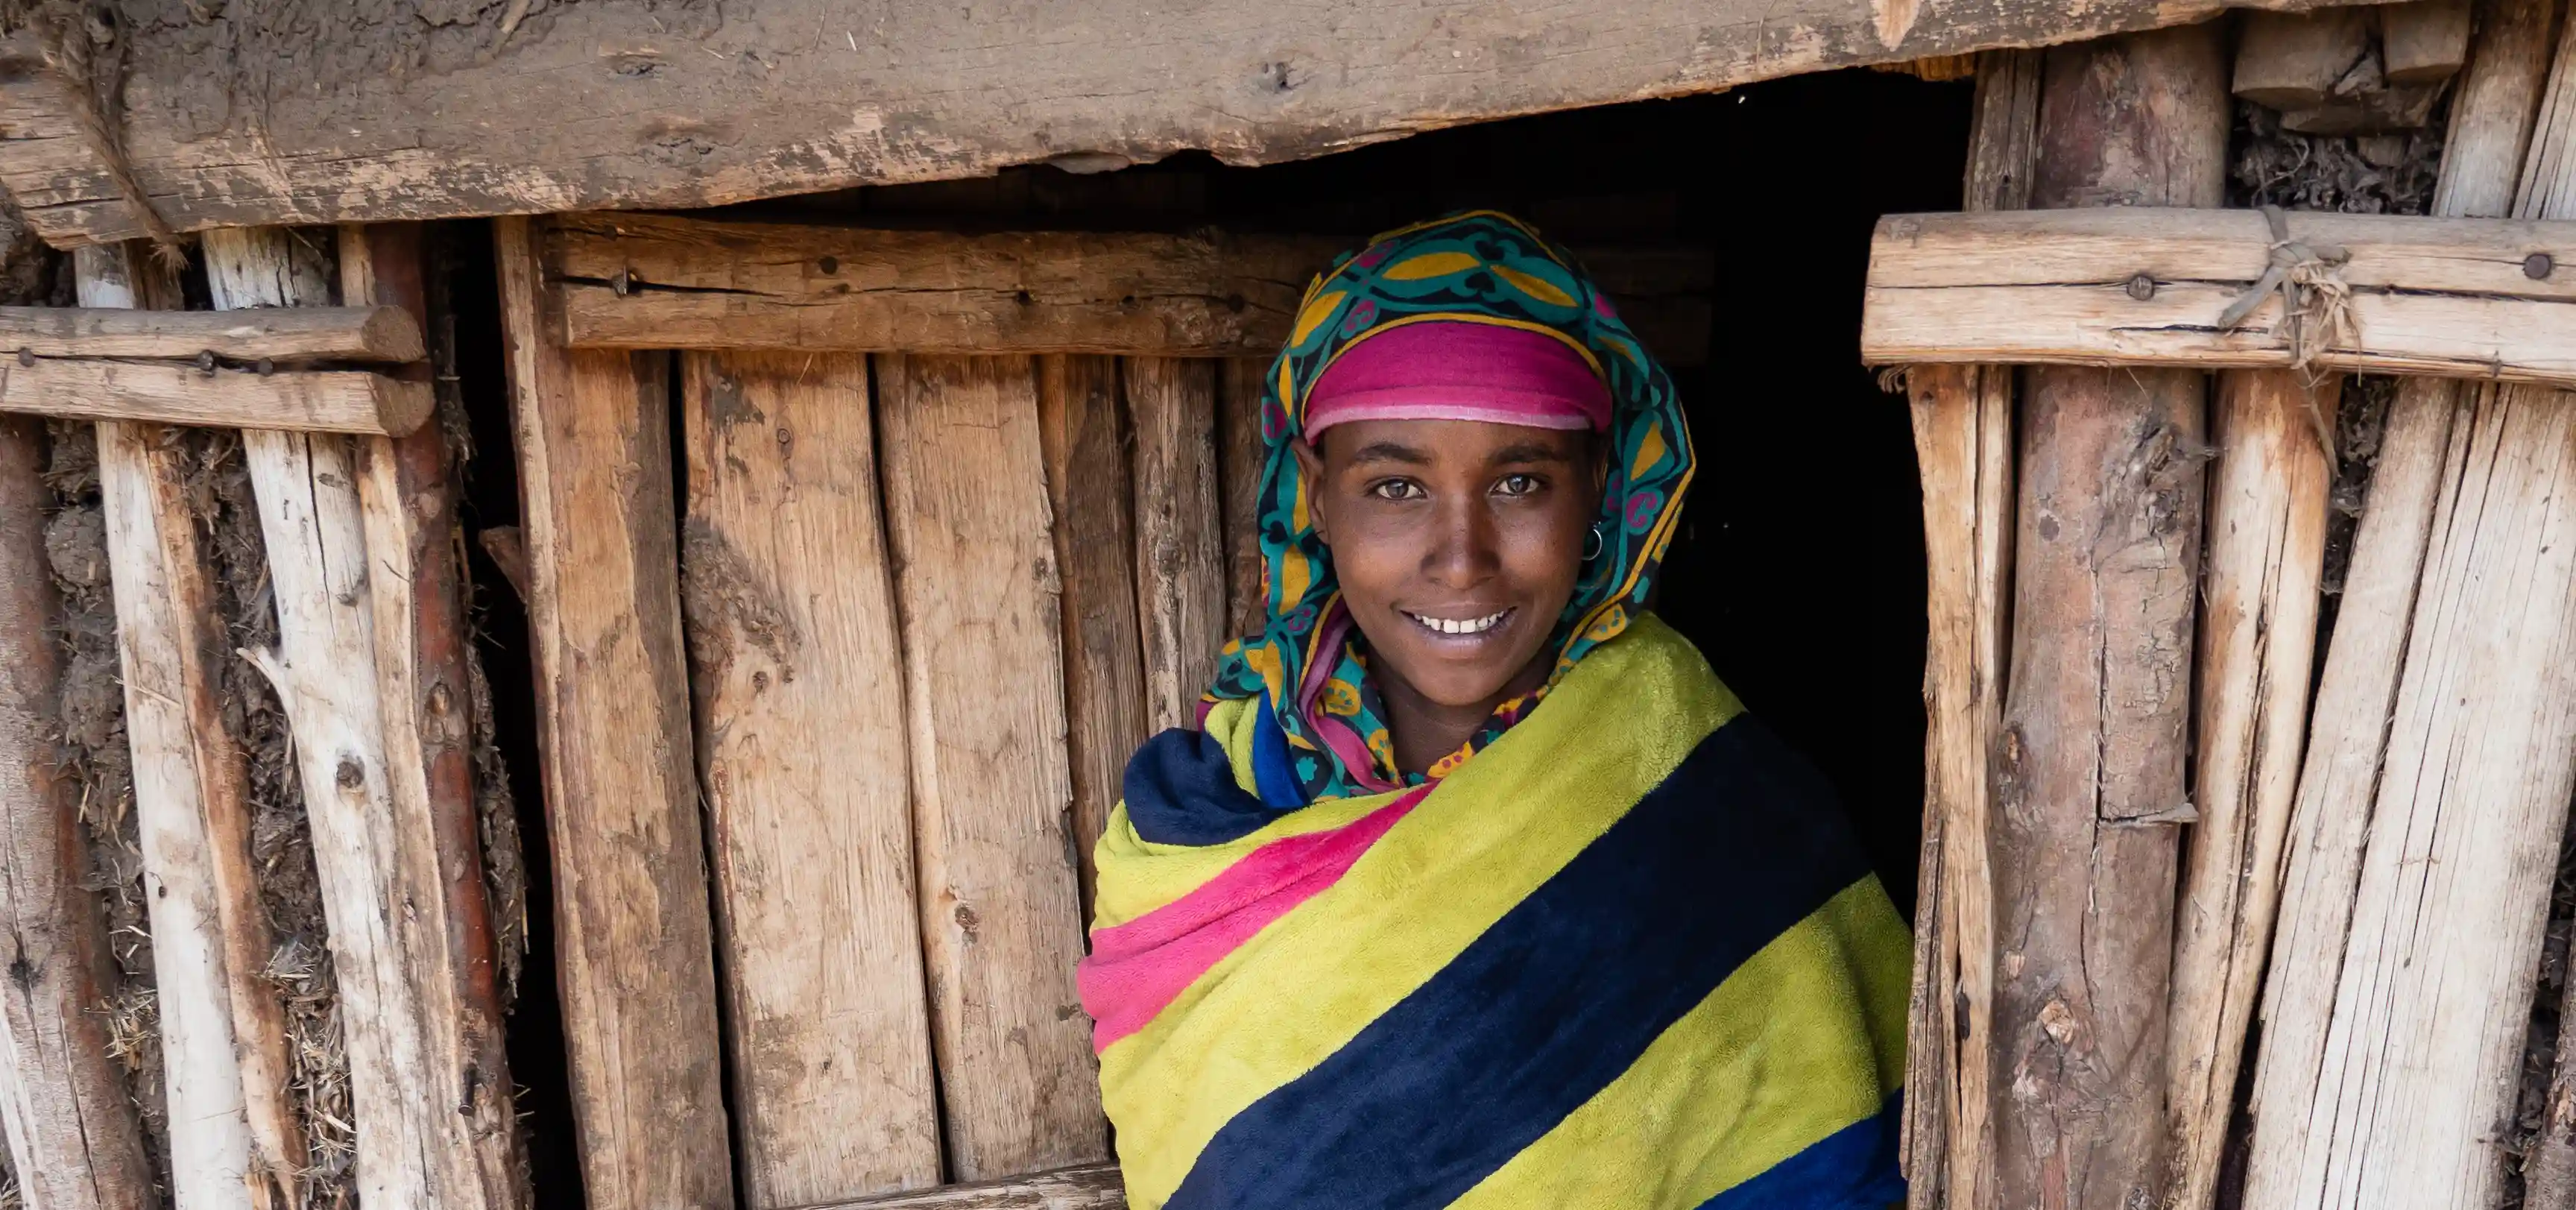 Ethiopian woman at her home